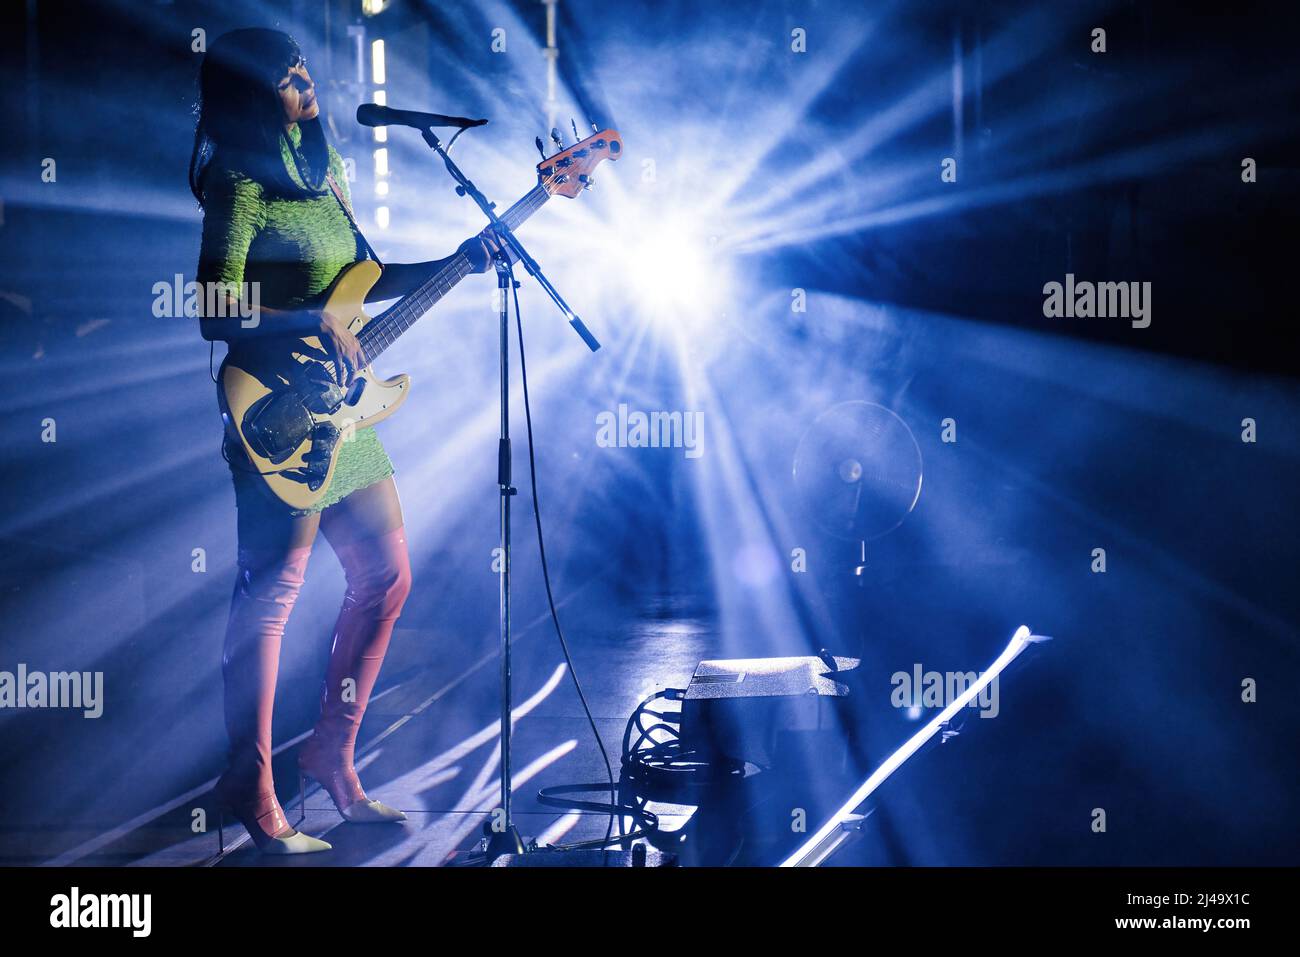 Copenhagen, Denmark. 10th, April 2022 The American funk trio Khruangbin performs a live concert at HB Hallen in Copenhagen. Here bass player Laura Lee is seen live on stage. (Photo credit: Gonzales Photo - Peter Troest). Stock Photo